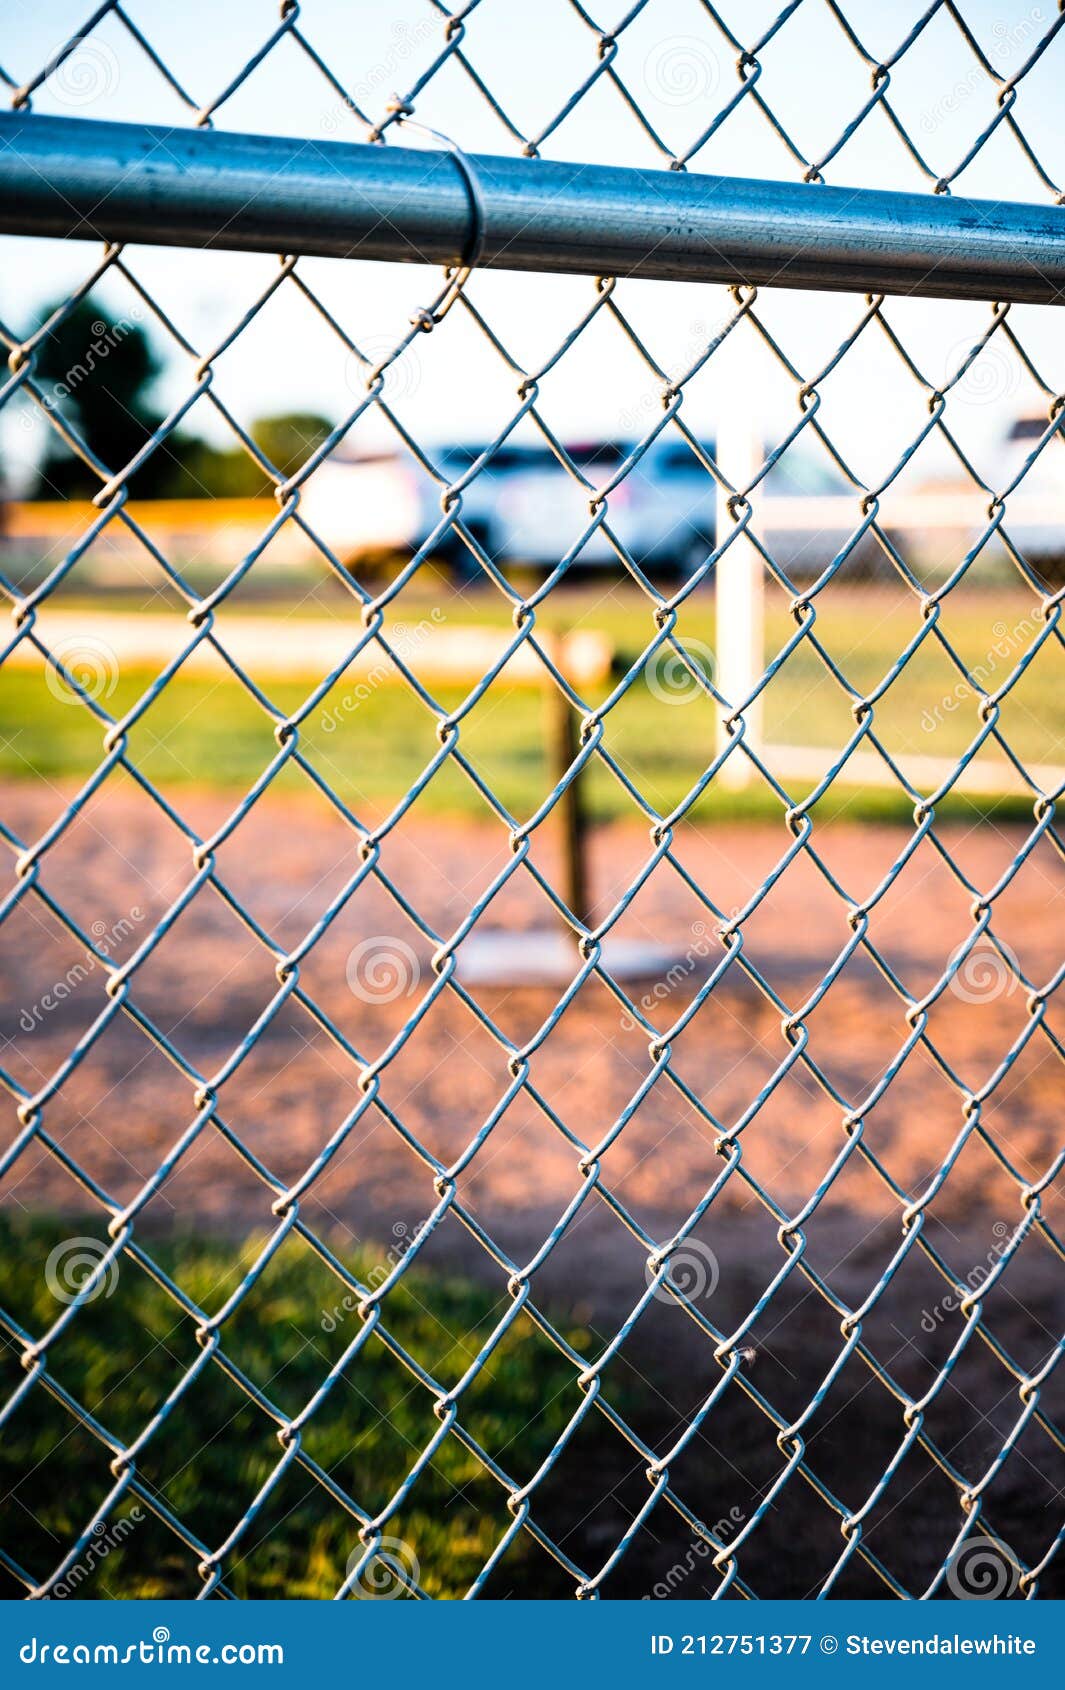 focus on chain link fence with t-ball background